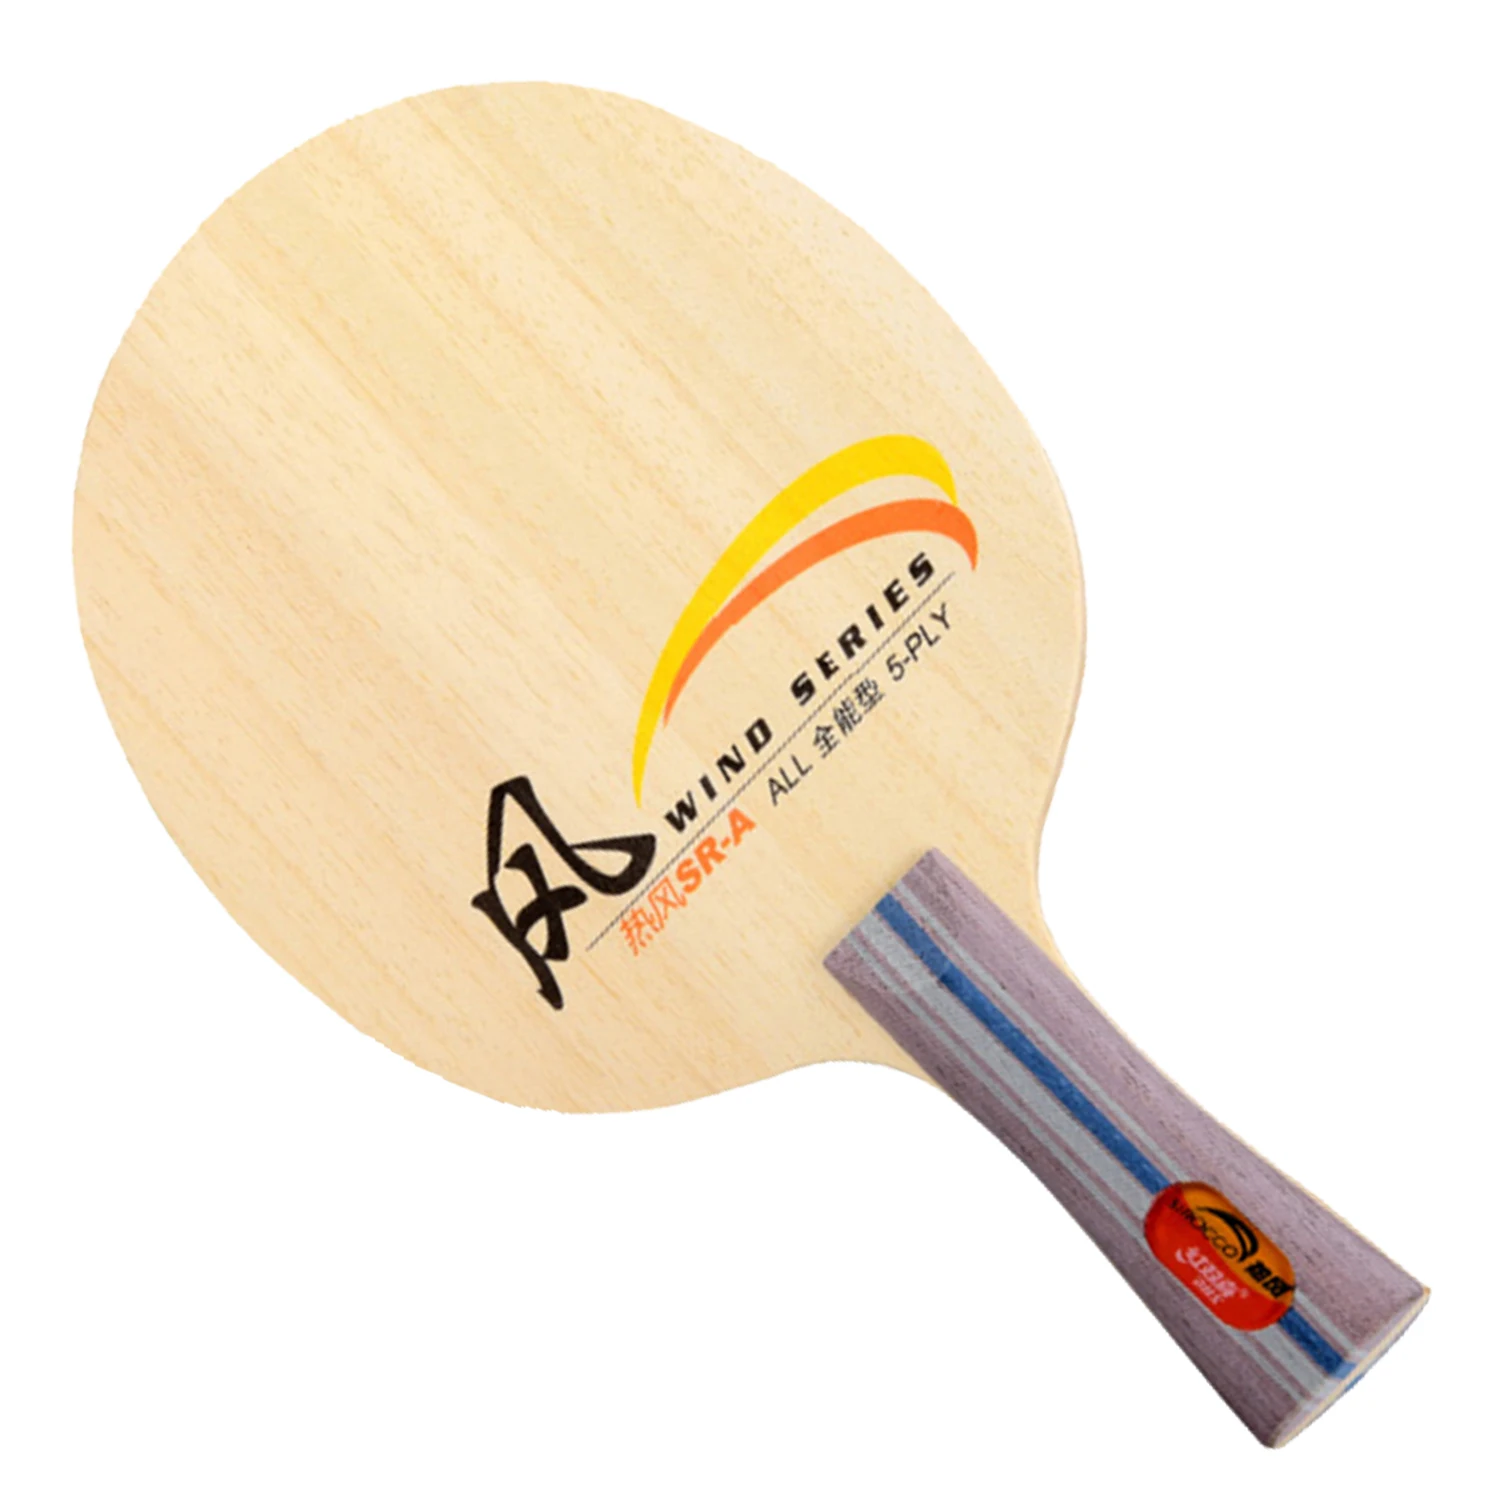 

Original DHS SR A B table tennis blade pure wood table tennis racket fast attack loop ping pong racket good control strength